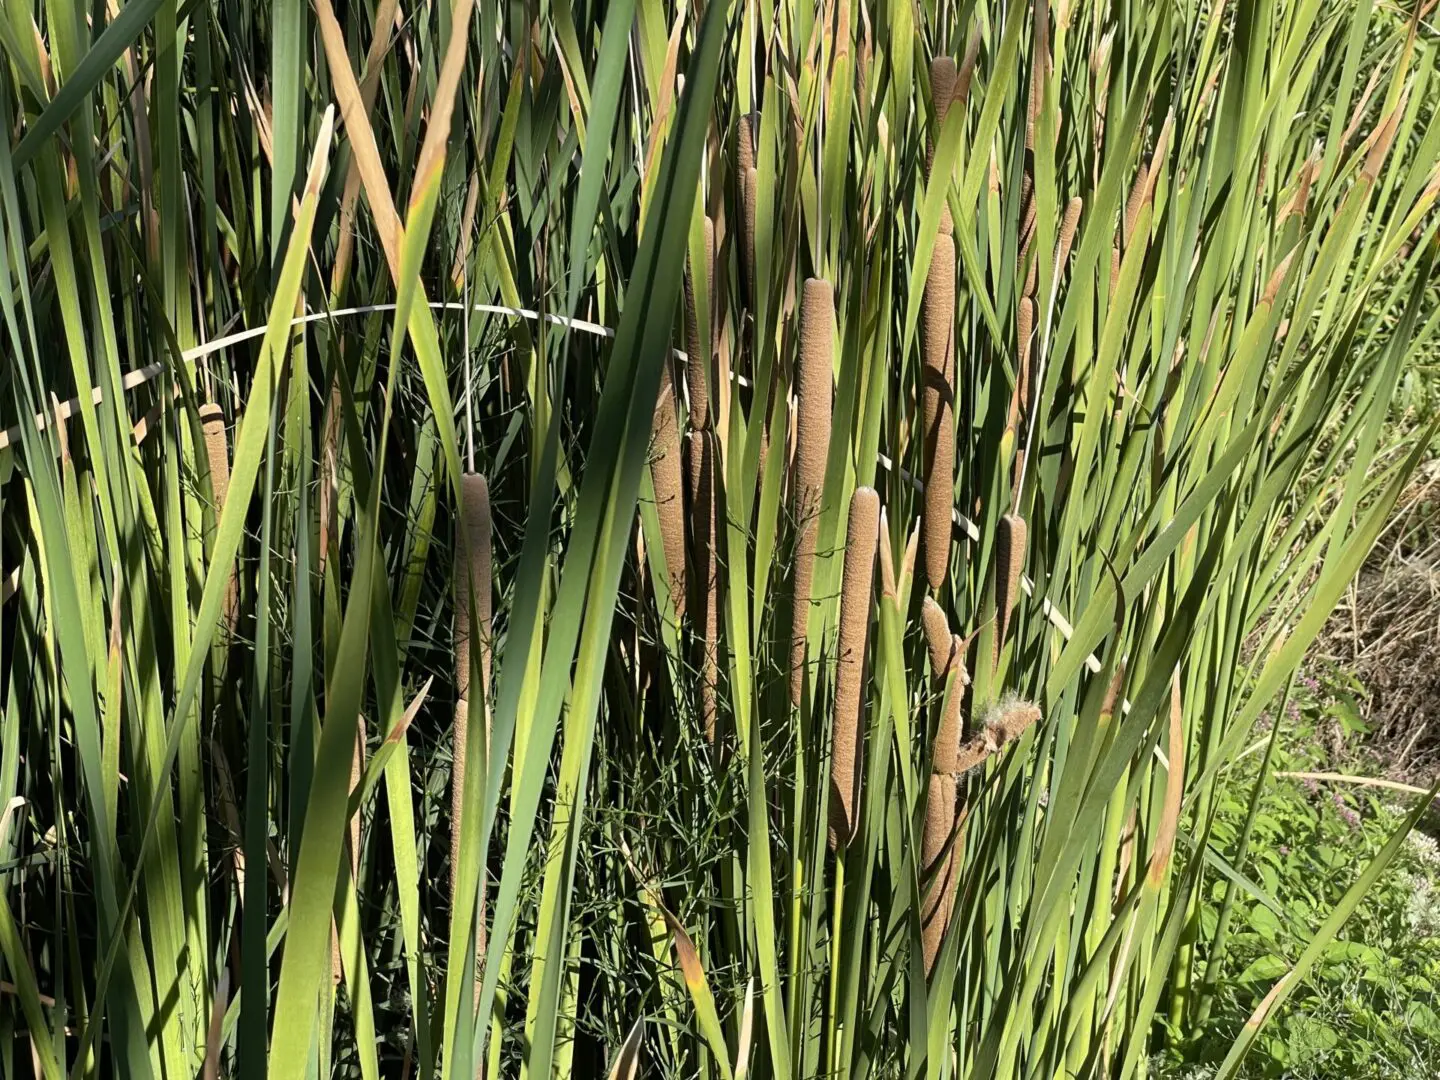 Cattail plant leaves with long stems